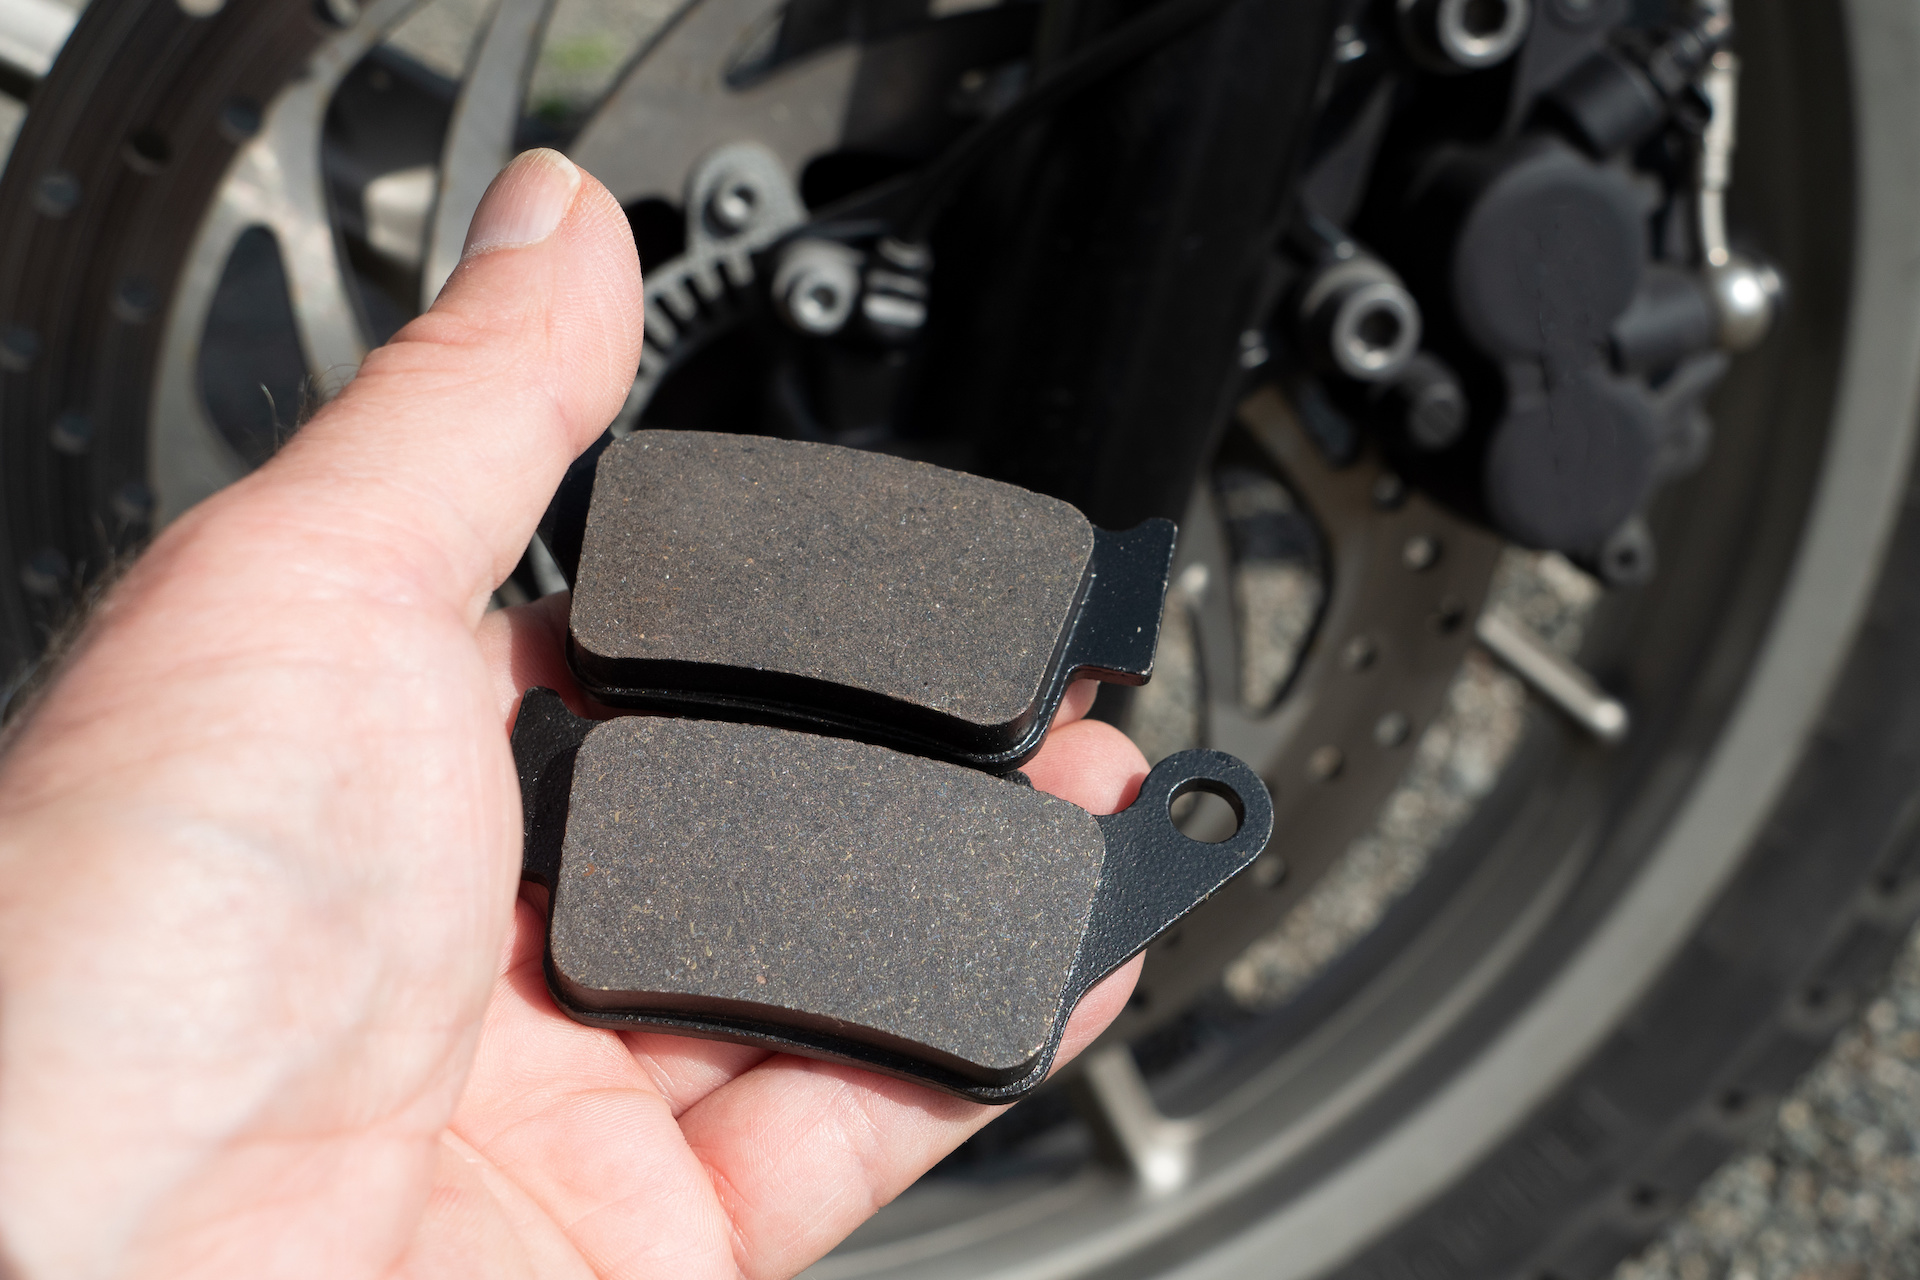 Fresh brake pads in a persons hand.